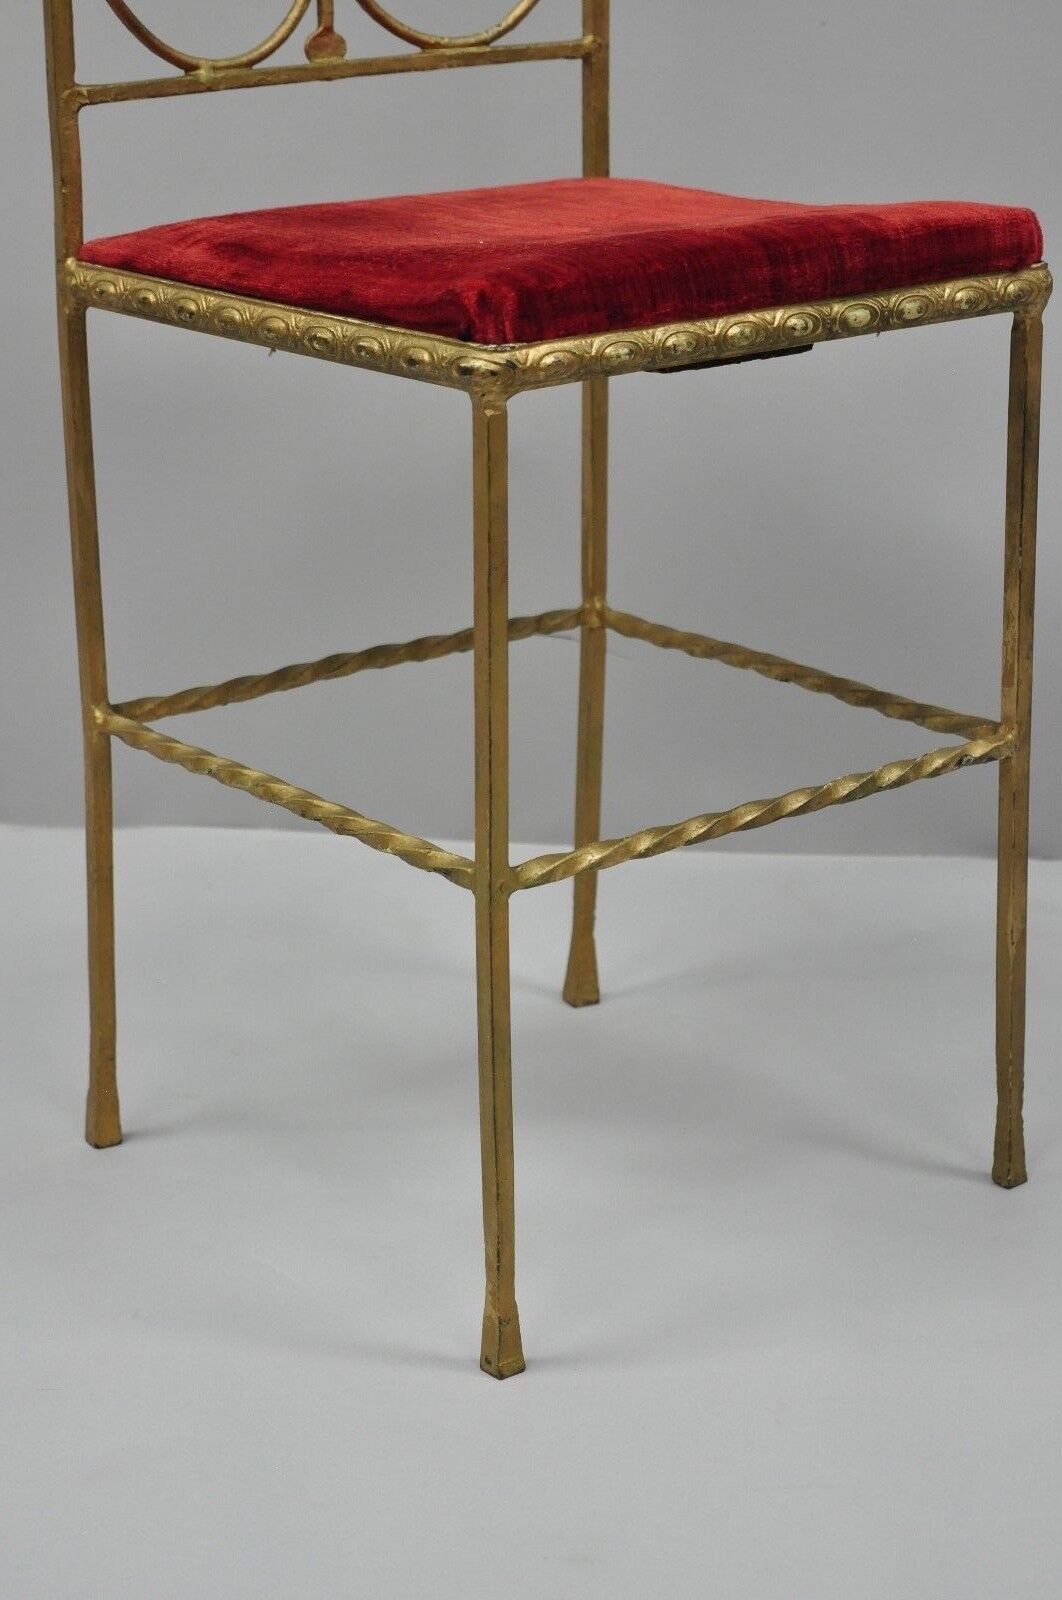 Antique Italian or Spanish Hollywood Regency Red & Gold Iron Gothic Side Chair